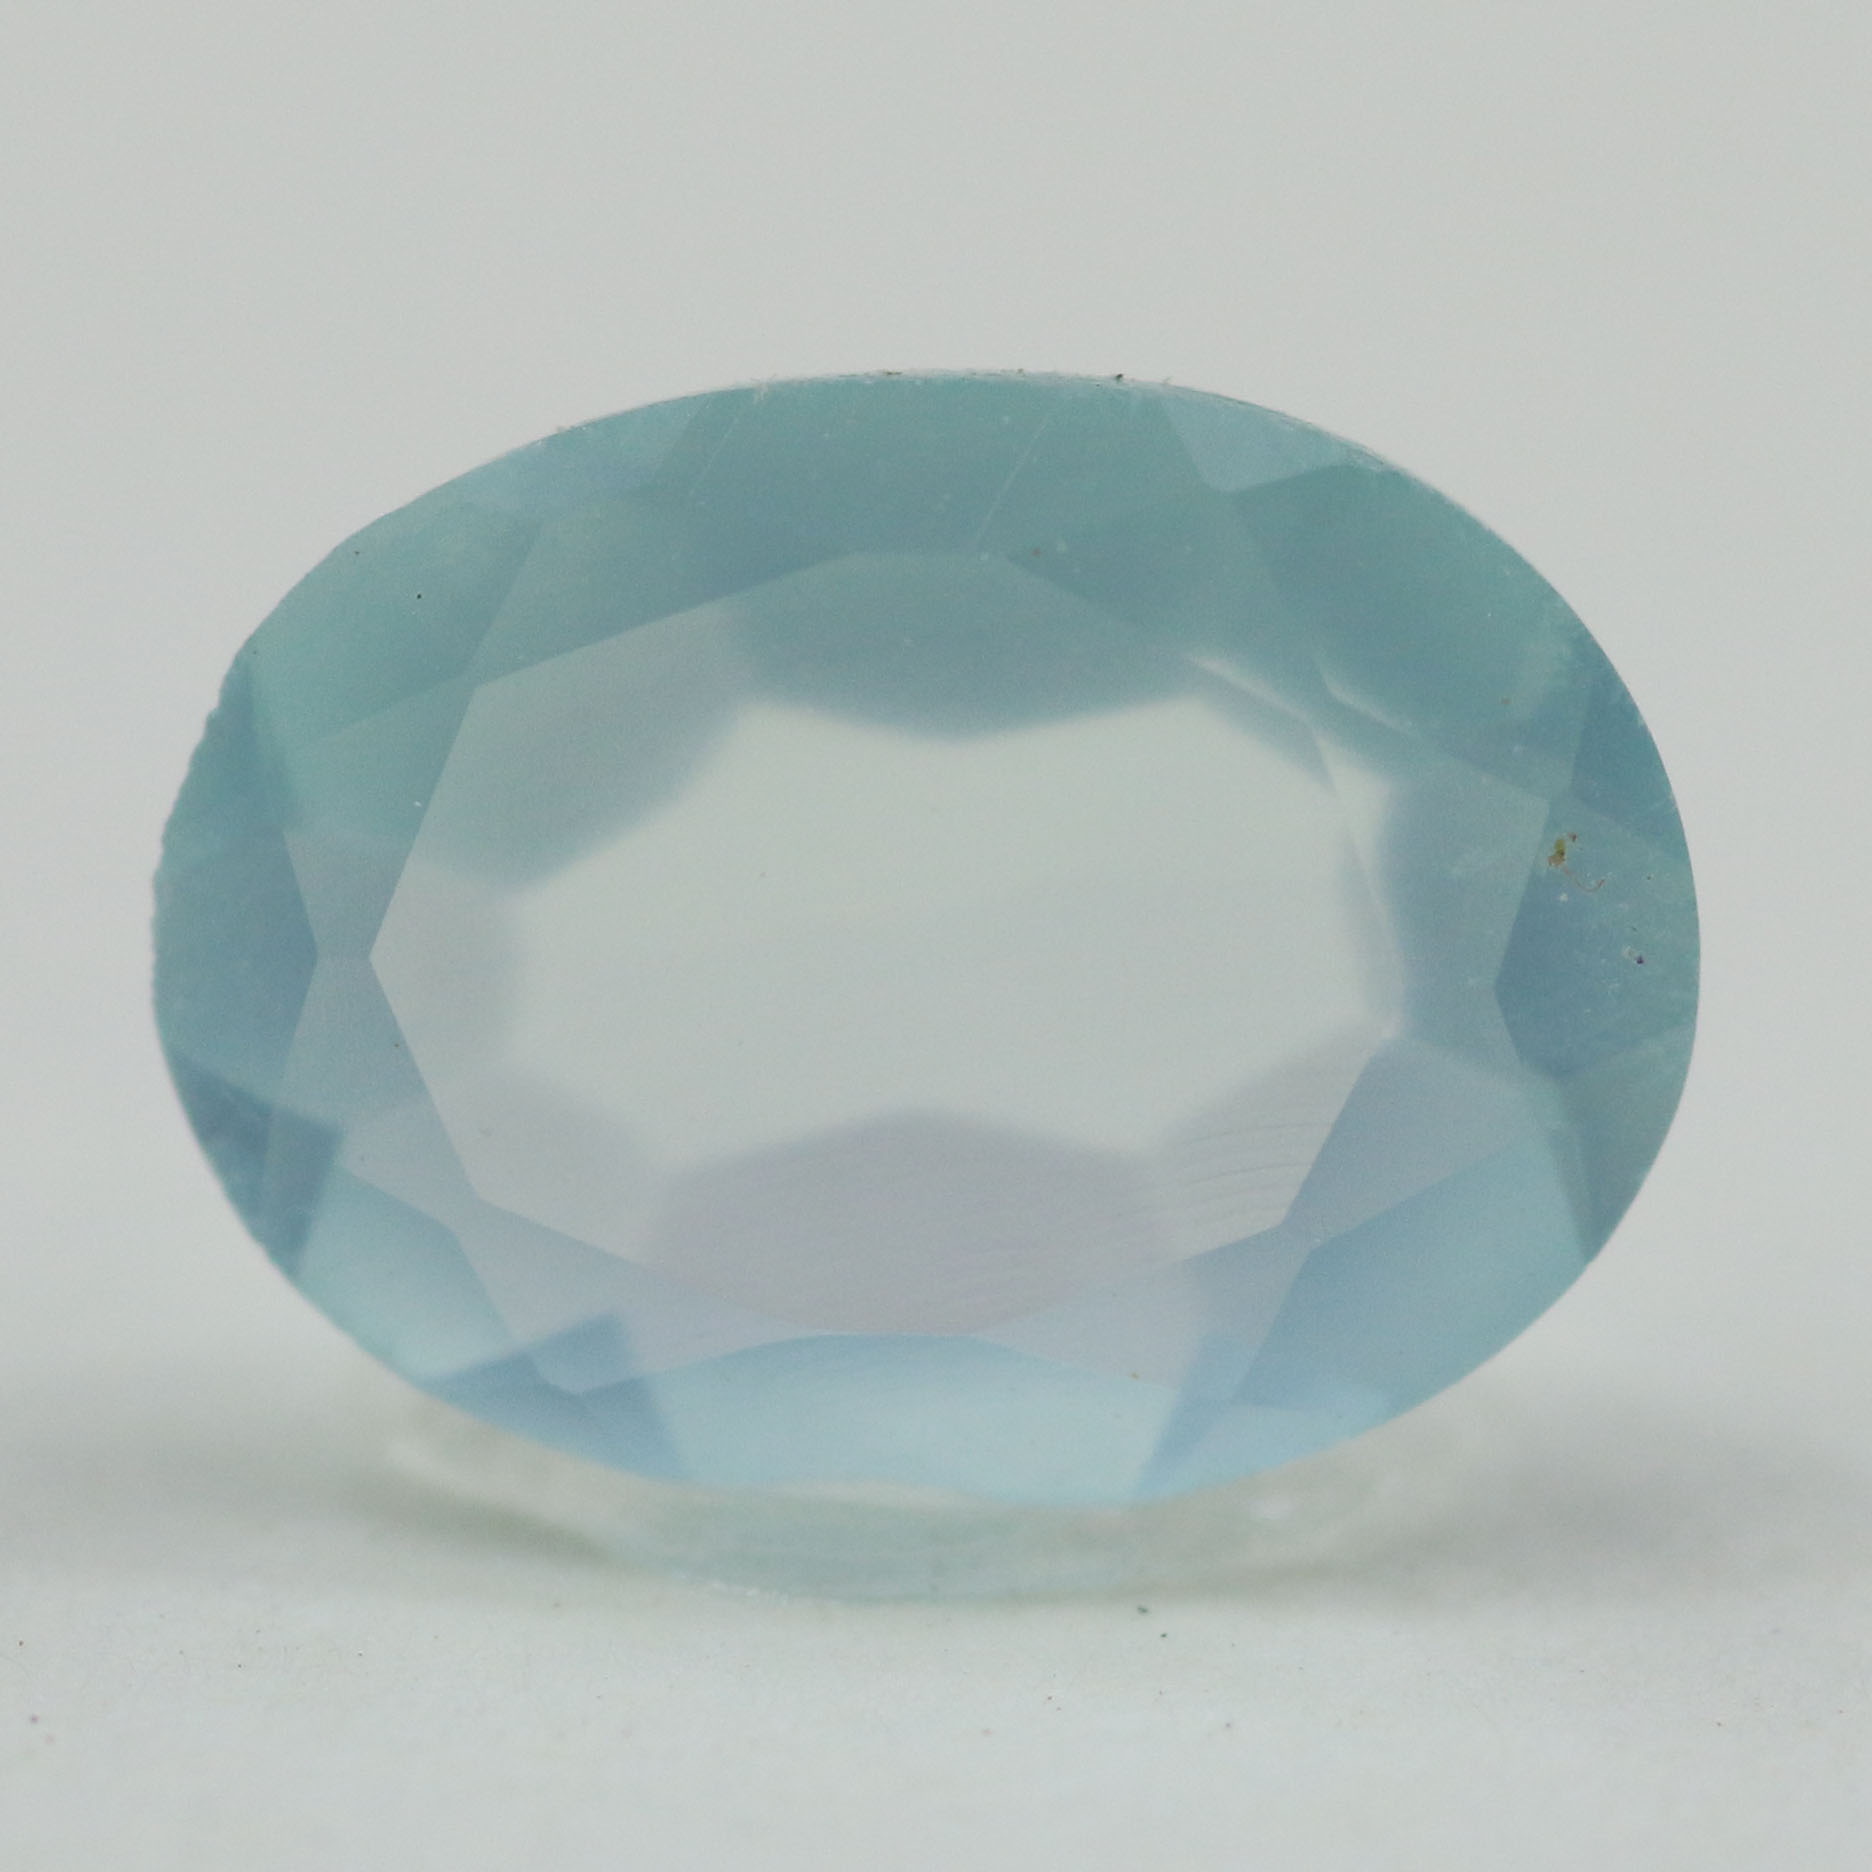 DYED SEA BLUE AGATE OVAL 5X3